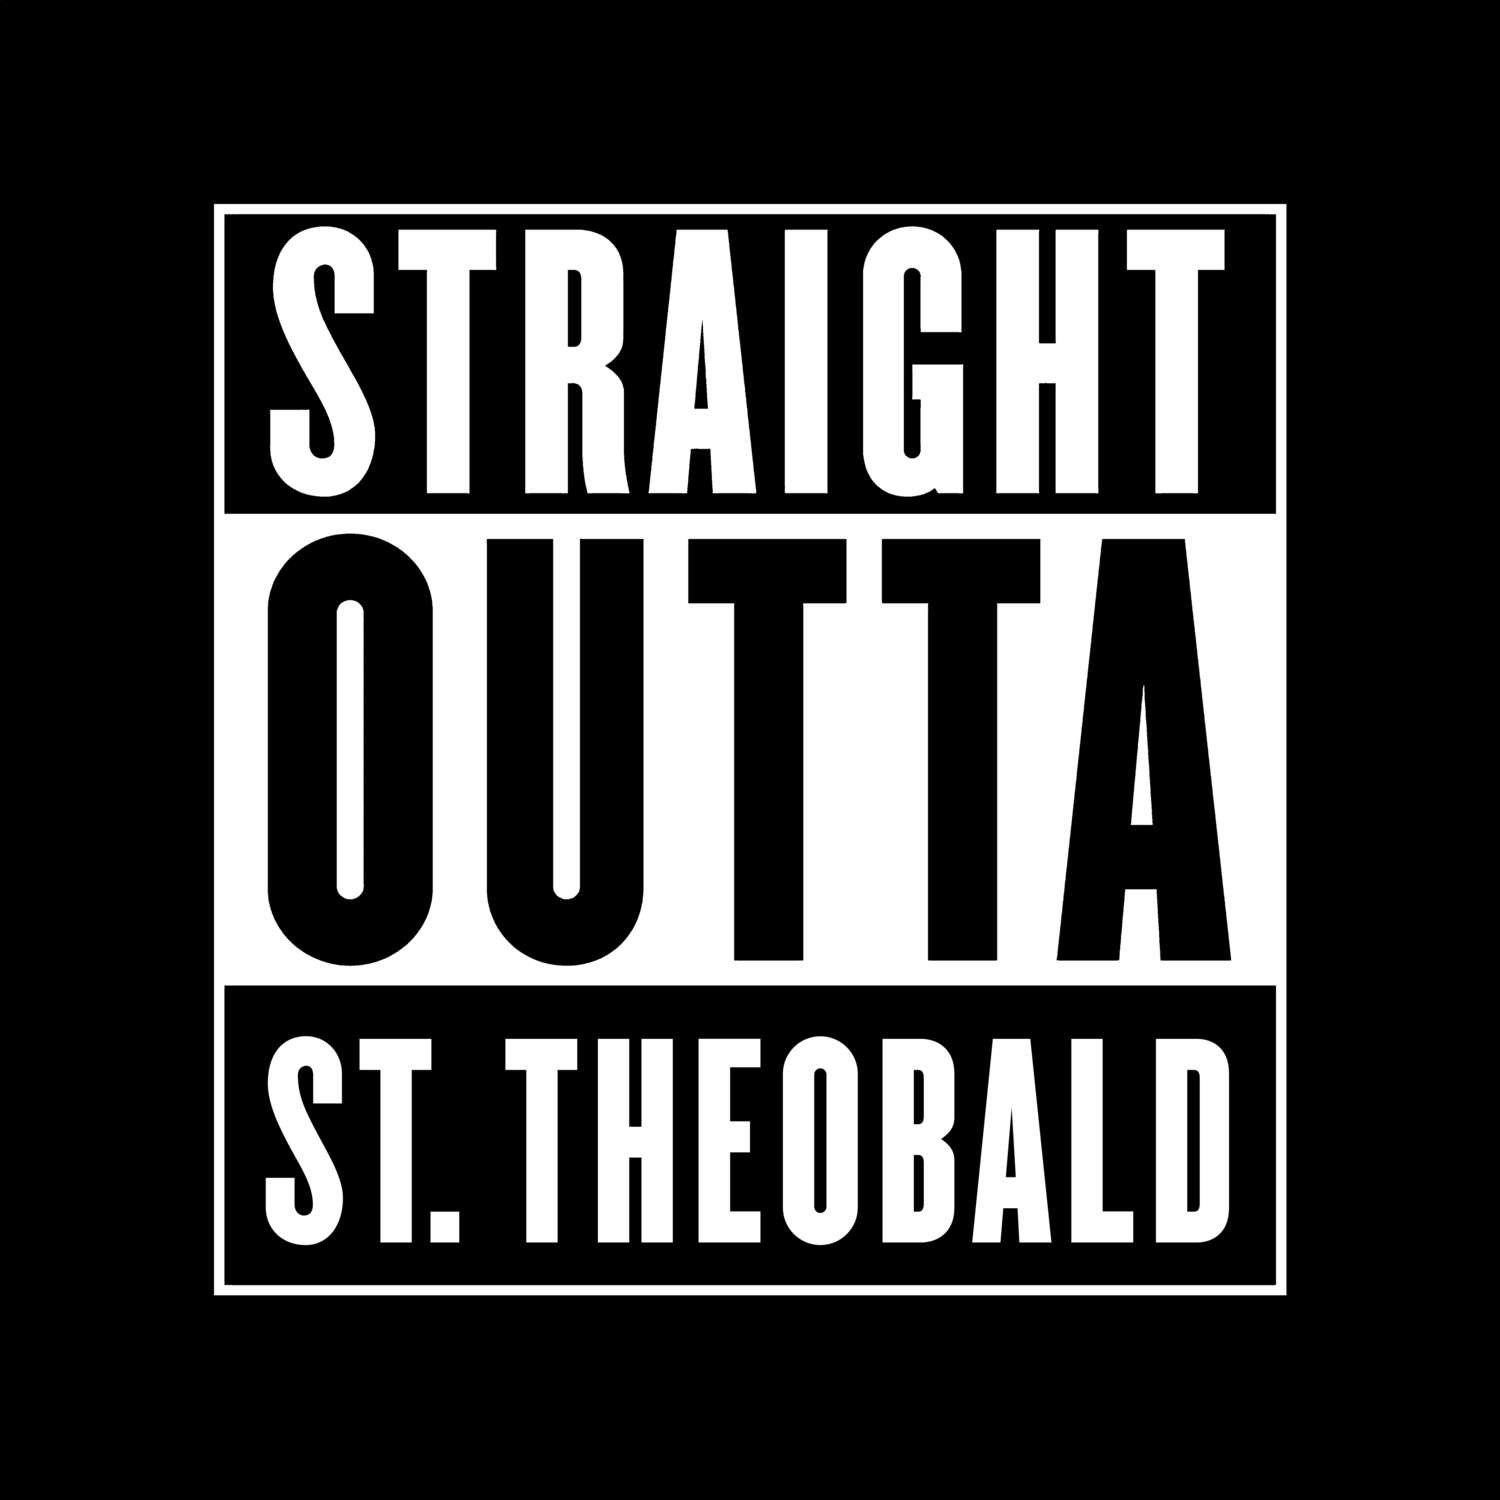 St. Theobald T-Shirt »Straight Outta«